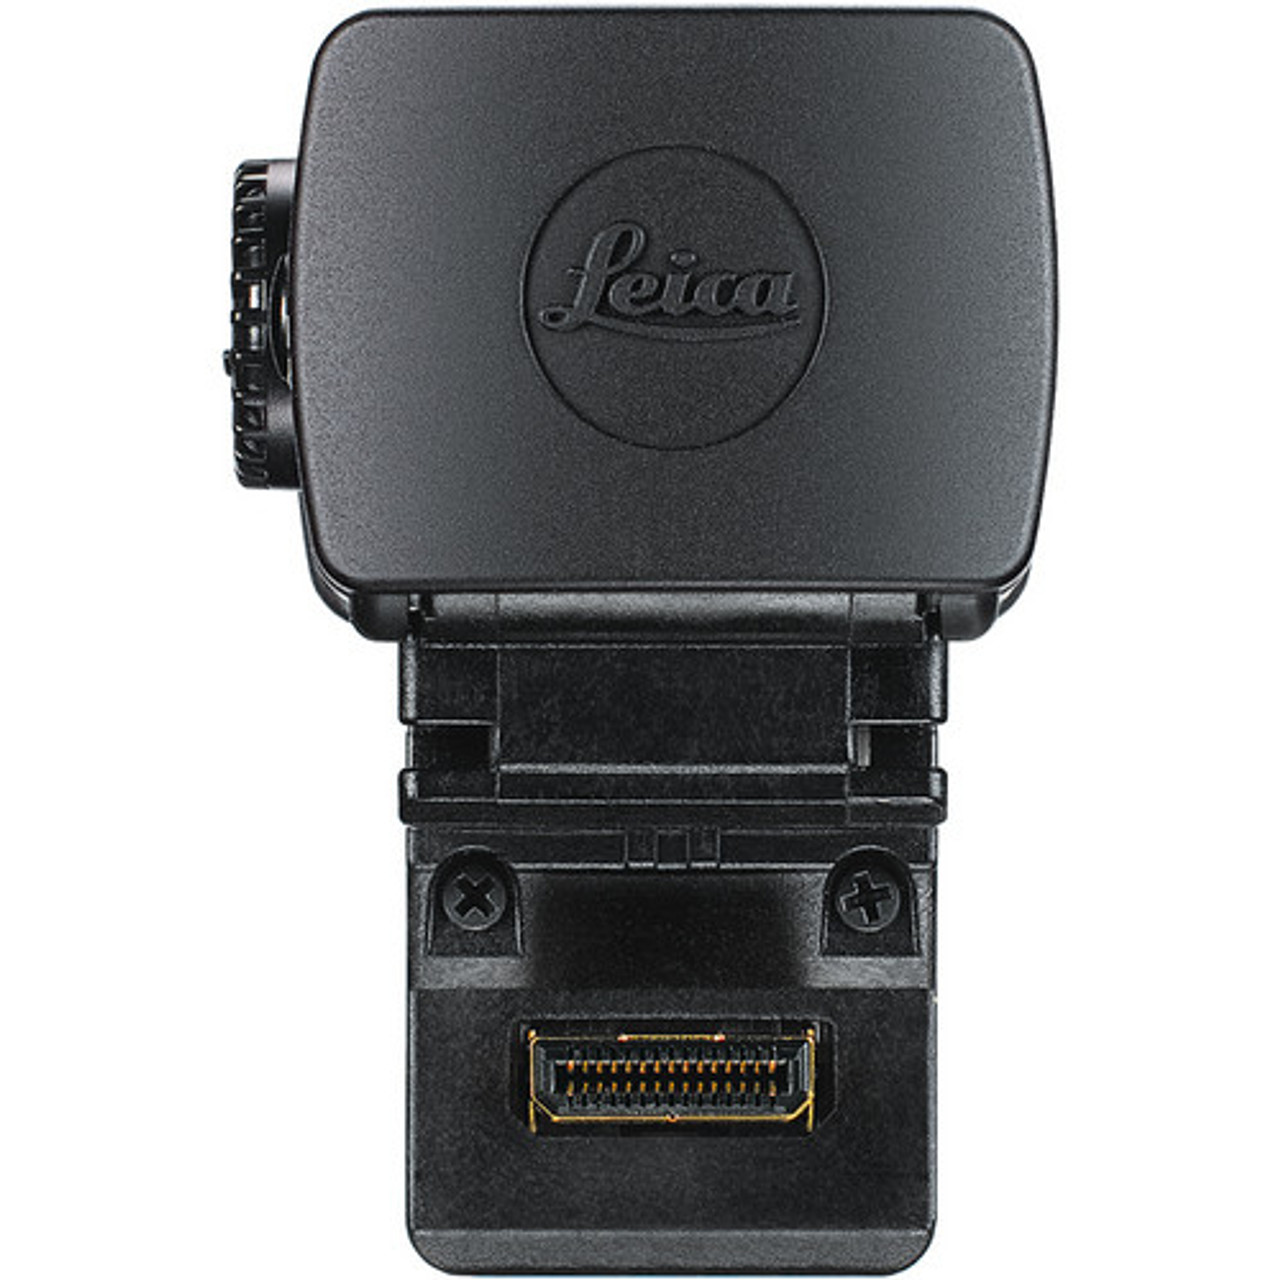 leica d-lux5 with electronic finder, come on and join the g…